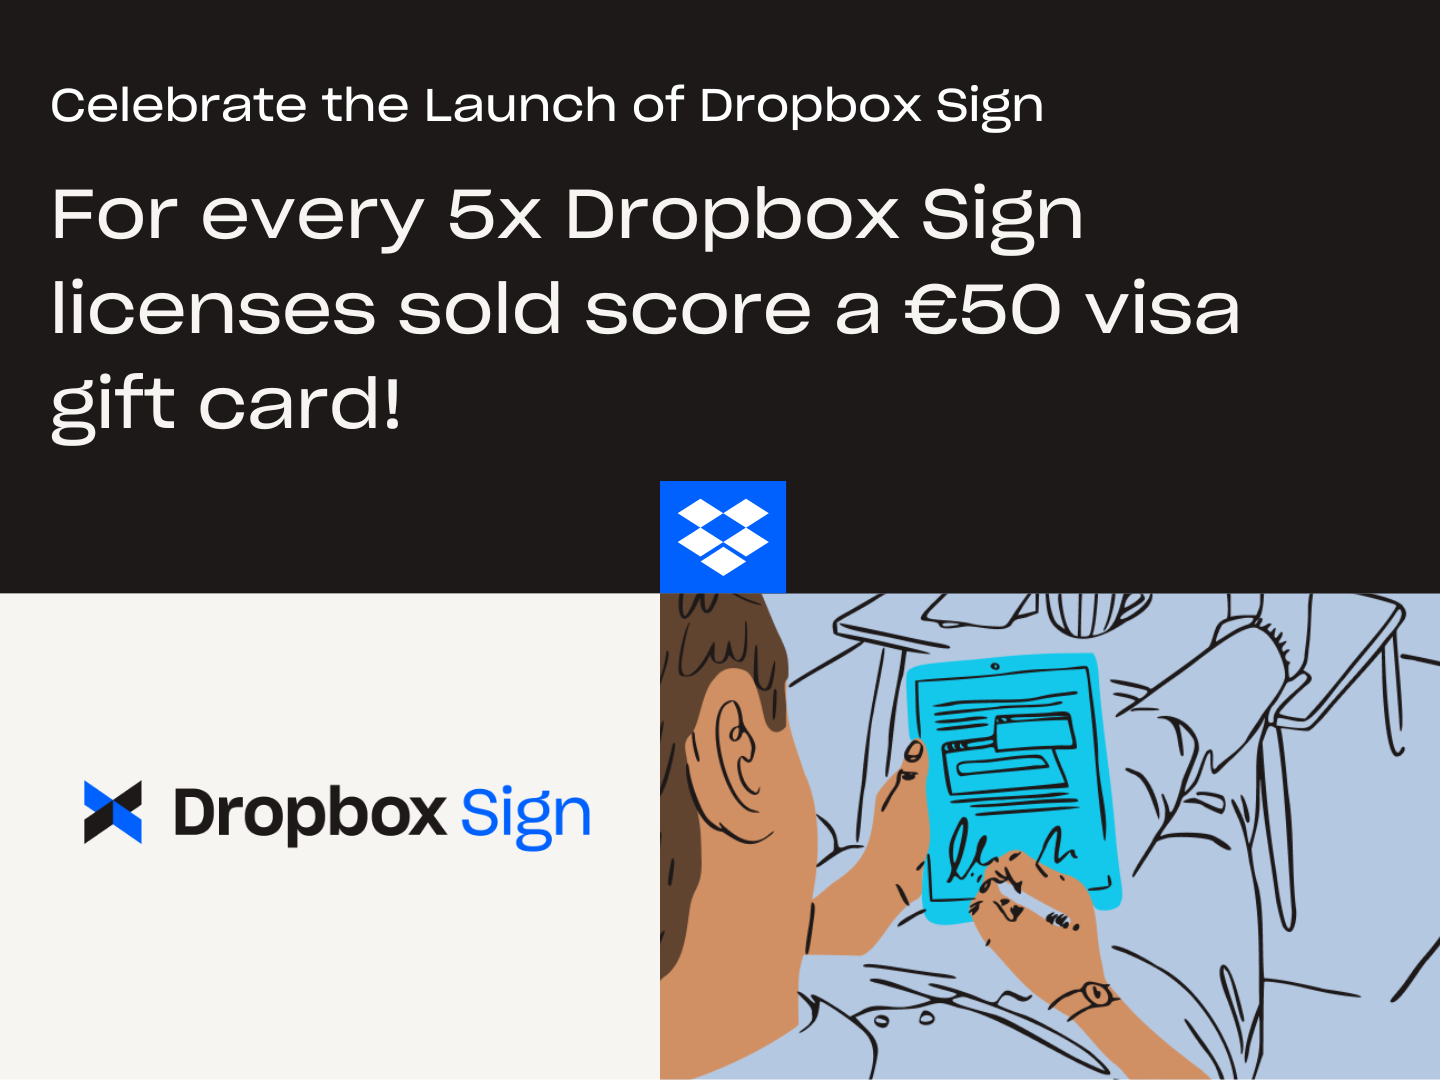 For every 5 Dropbox Sign licenses sold, score a €50 gift card